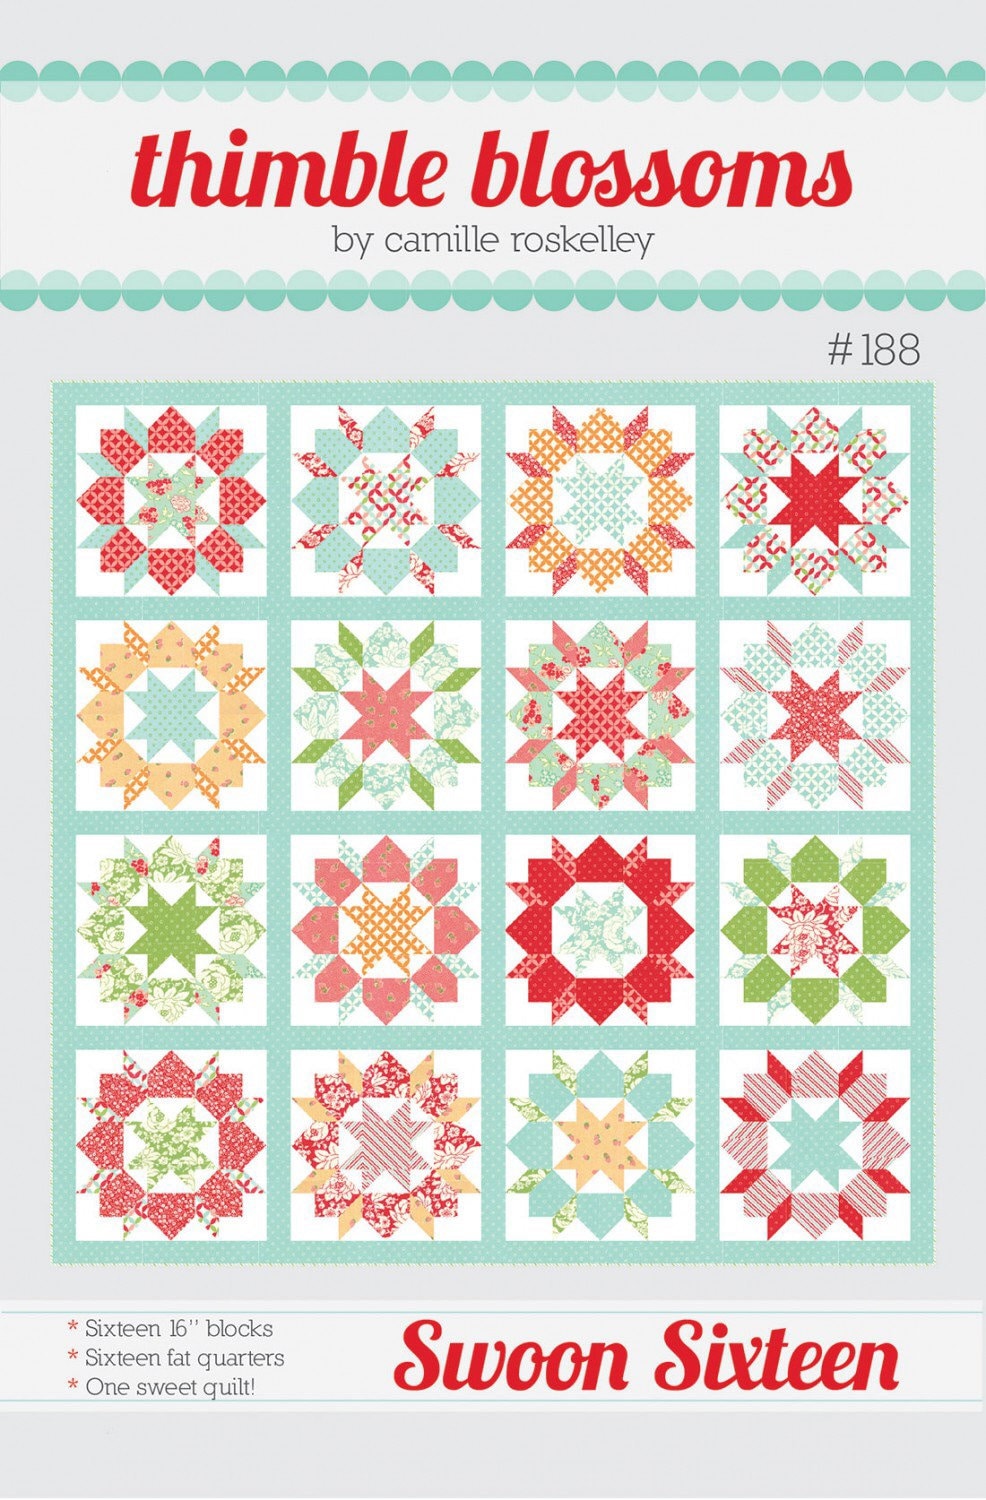 Swoon Sixteen Quilt Pattern - Thimble Blossoms - Camille Roskelley - Fat Quarter Friendly - 74” x 74”